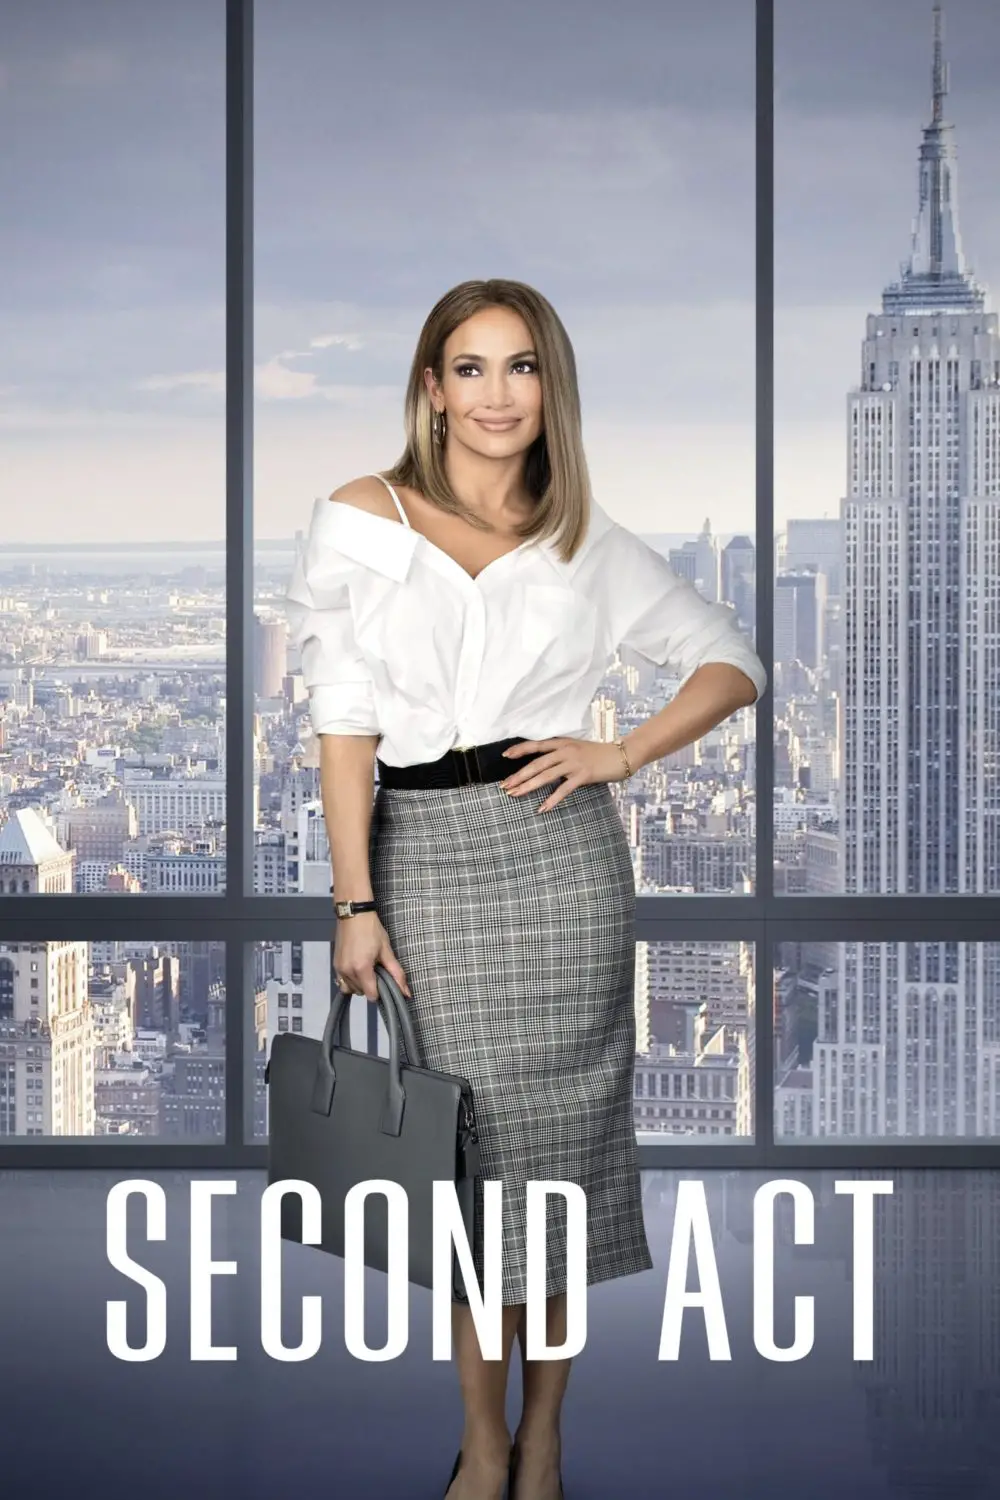 You are currently viewing Second Act